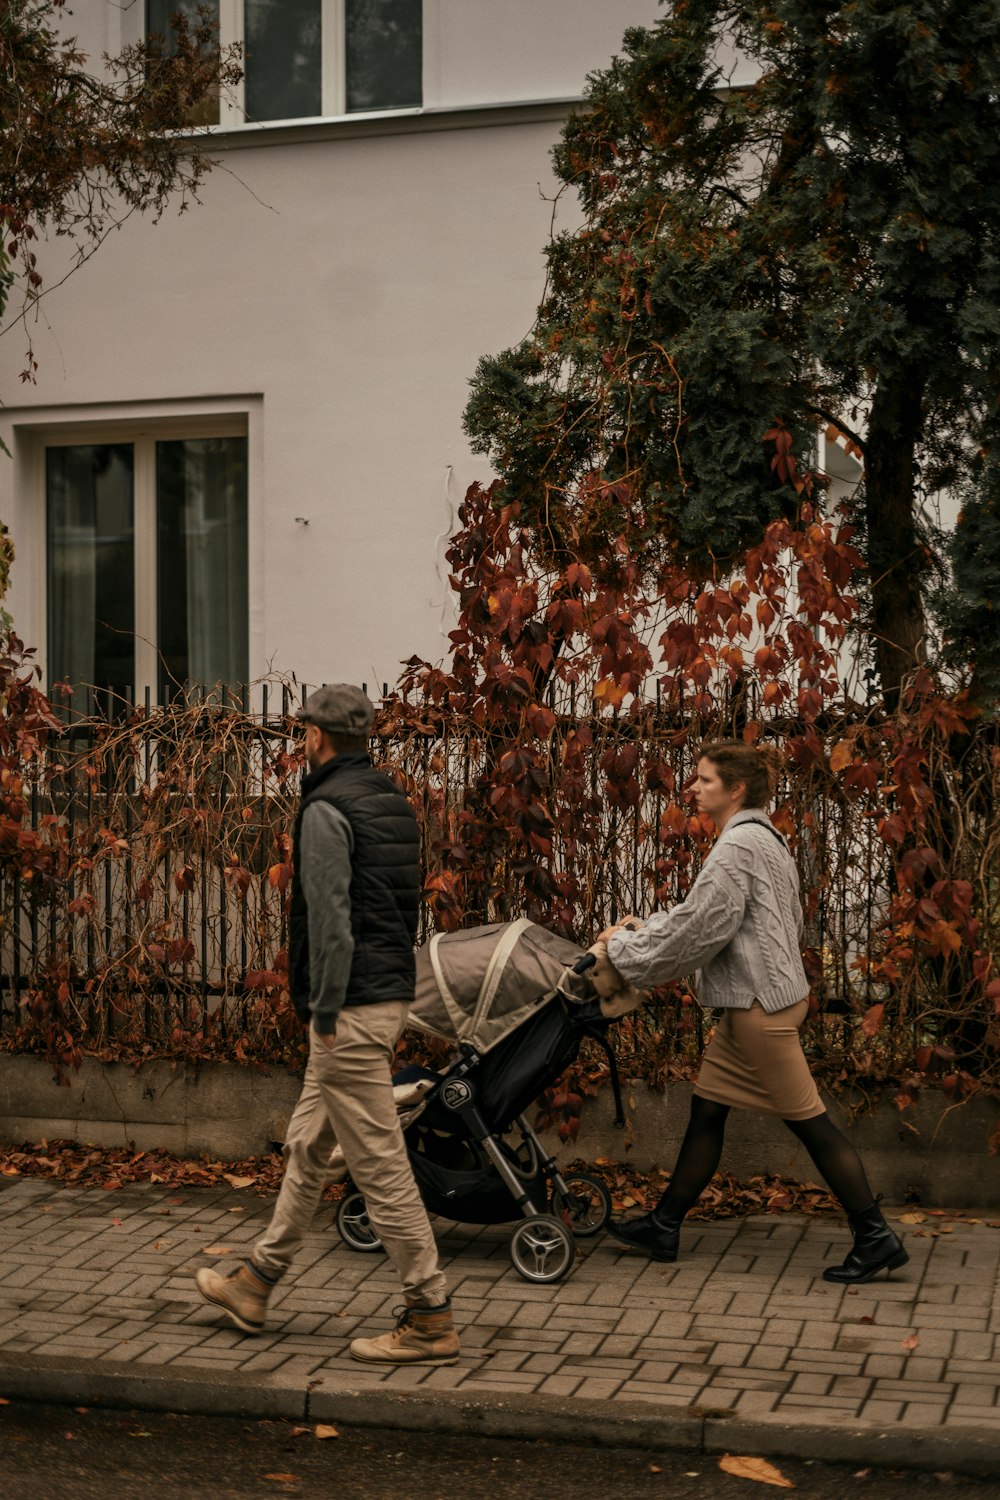 a man pushing a baby in a stroller